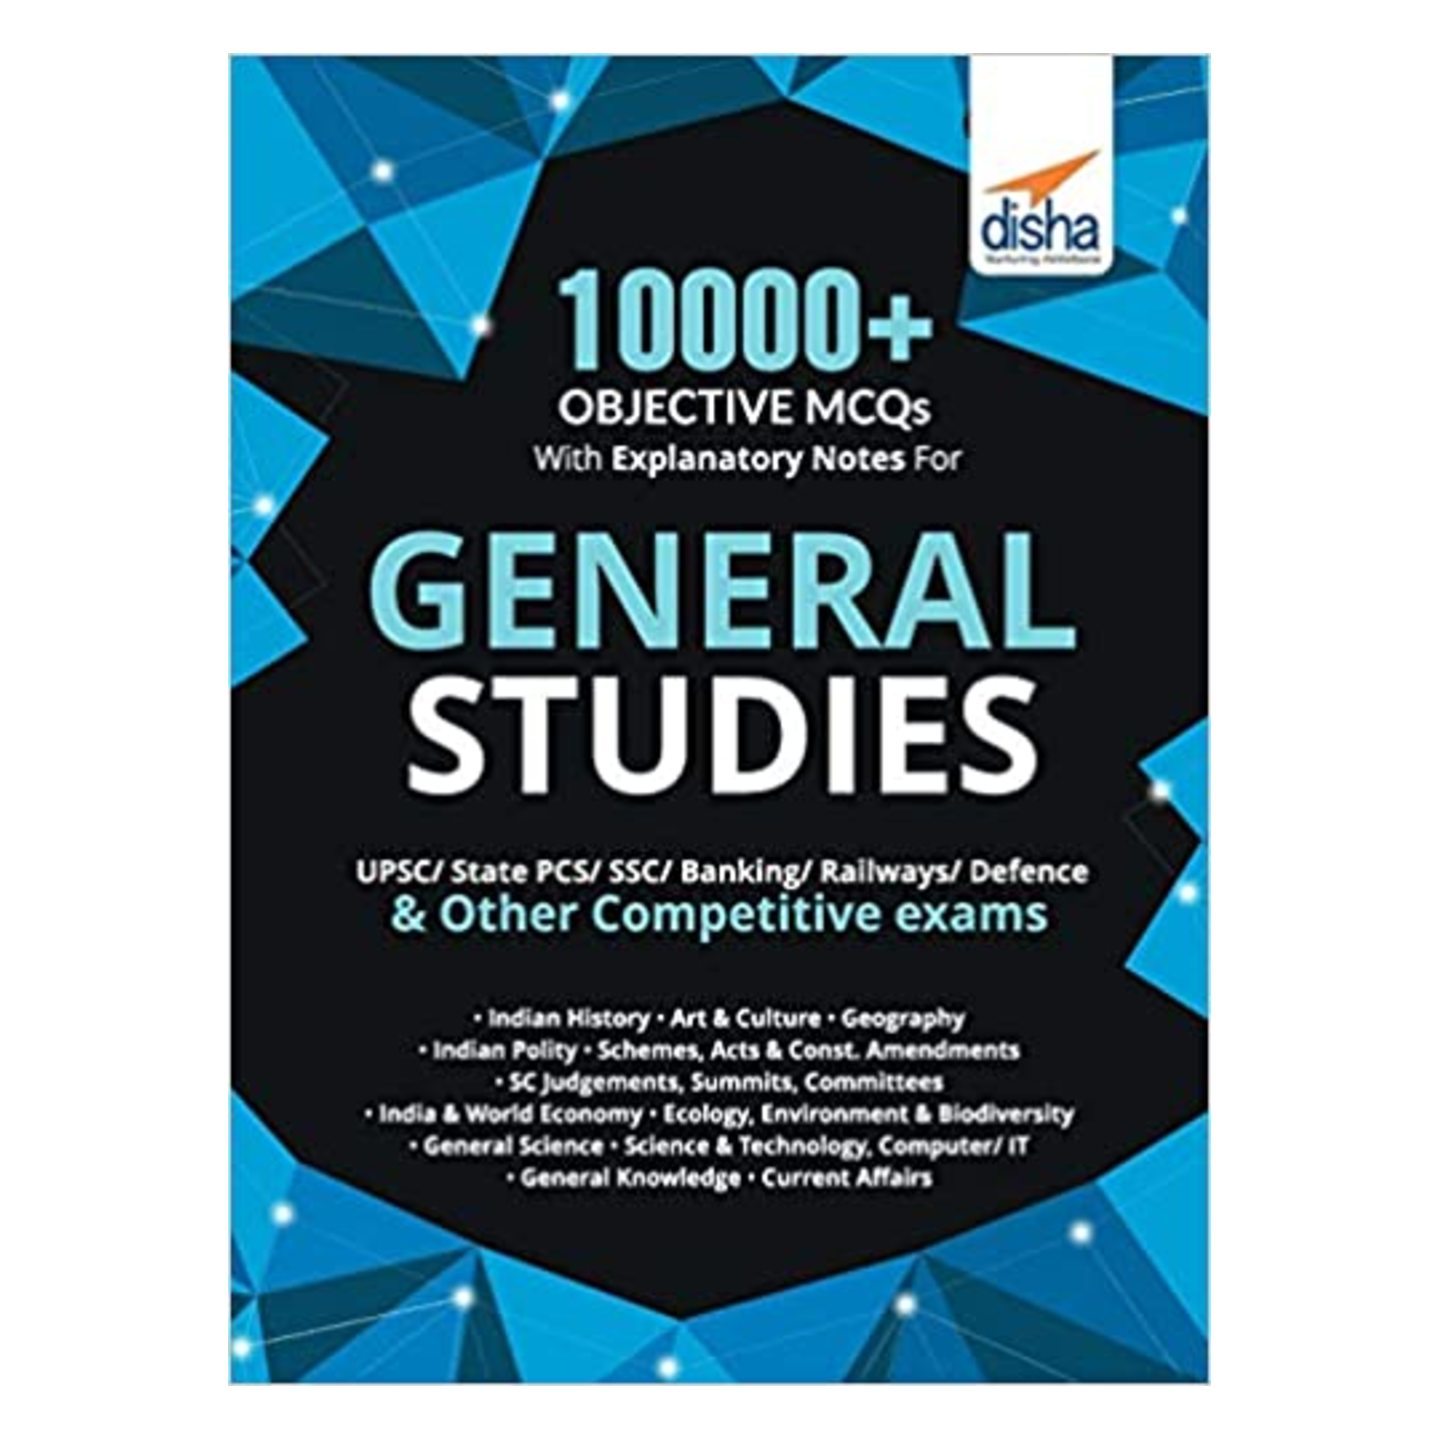 10000+ Objective MCQs with Explanatory Notes for General Studies UPSCState PCSSSCBankingRailwaysDefence